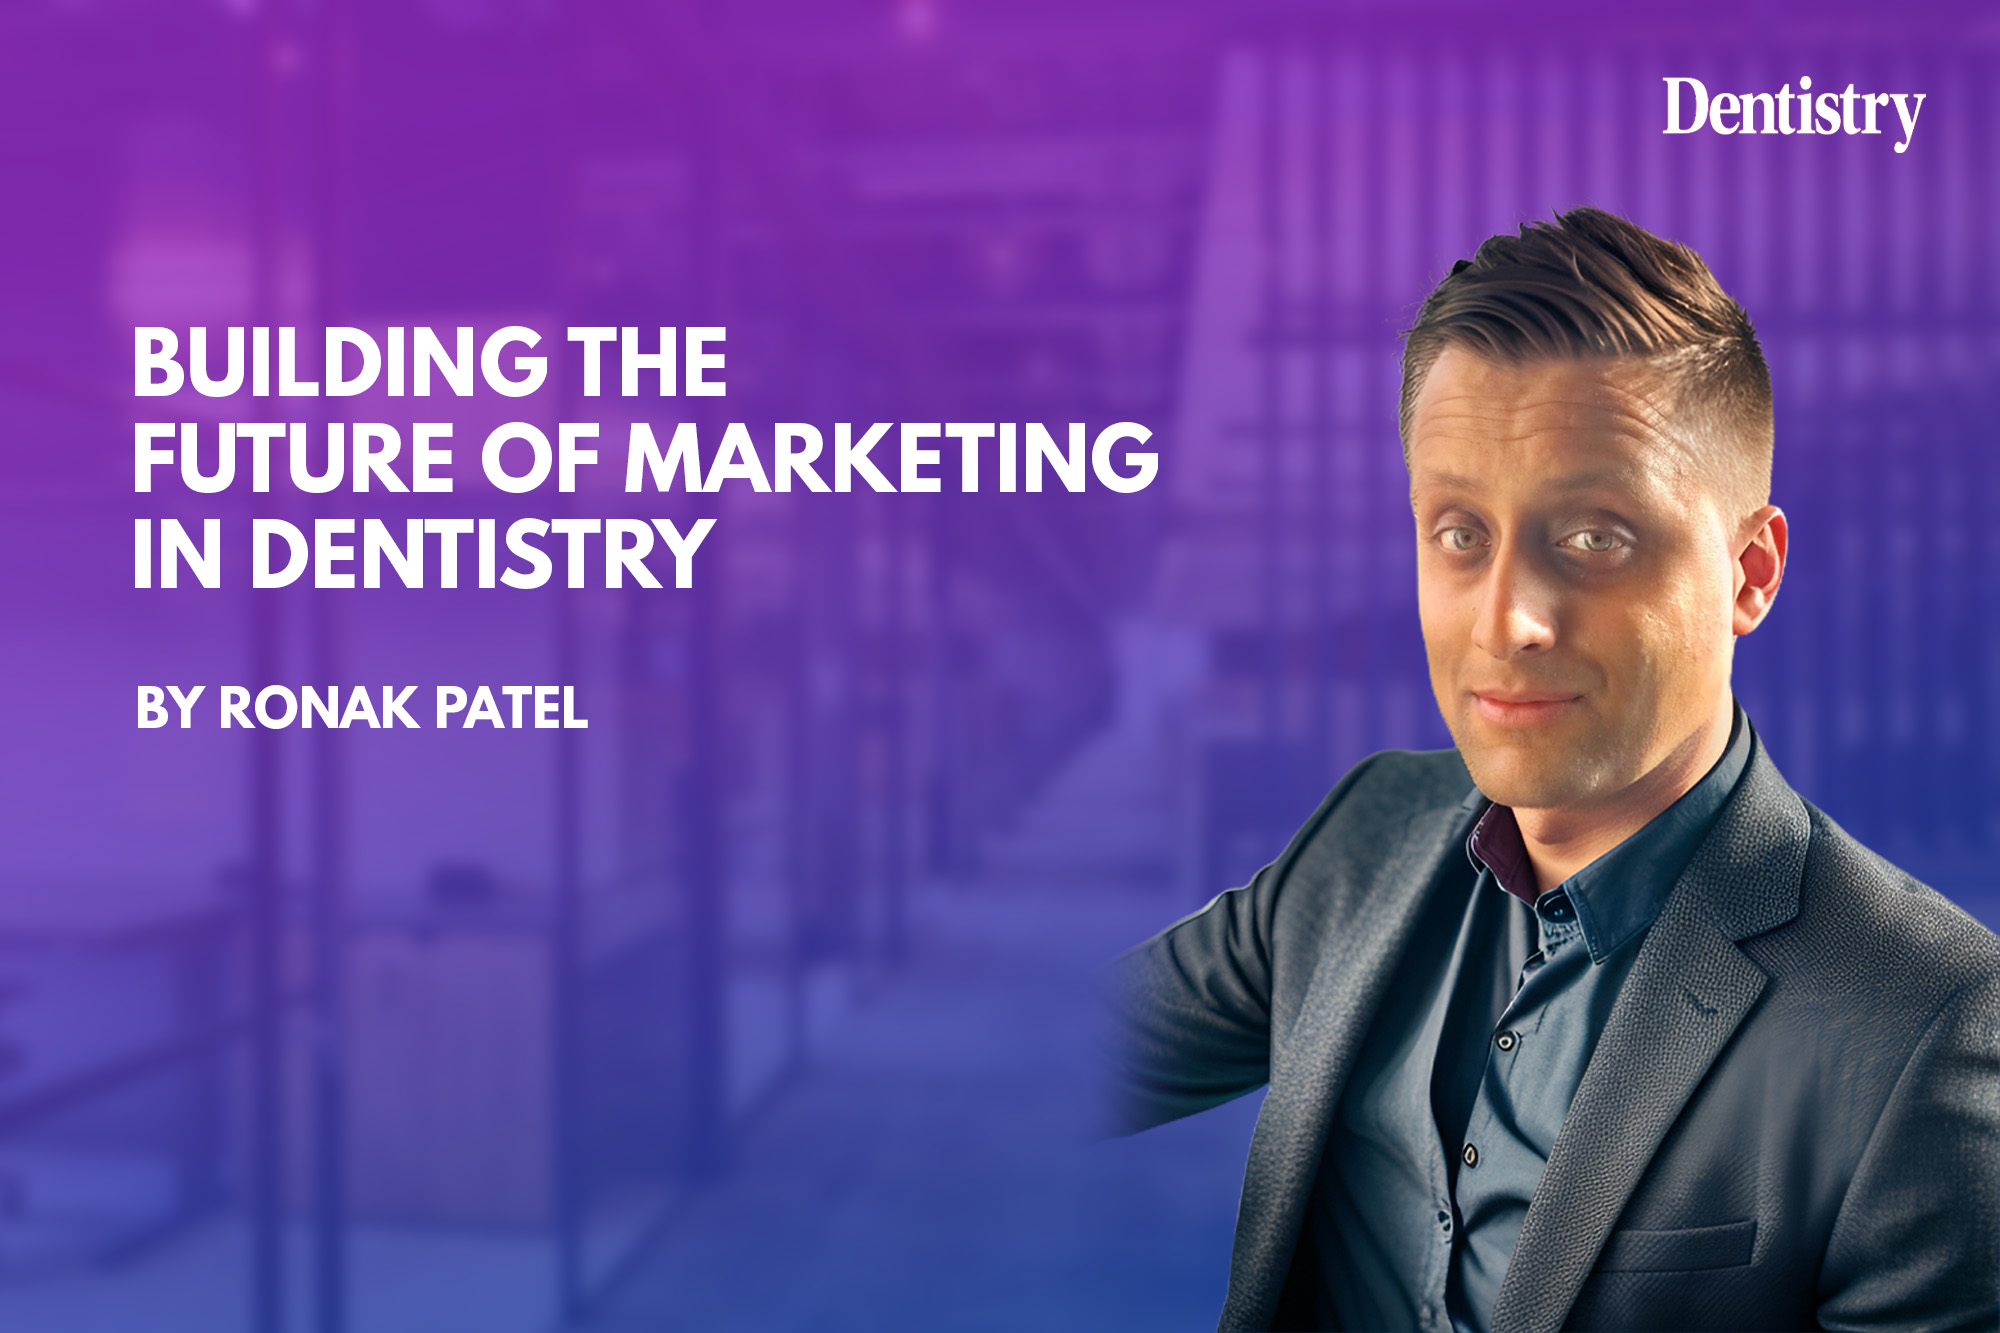 Ronak Patel shares the details of Altitude Lifetyle's rise to success as a leading dental marketing agency throughout the US, Europe and Asia.